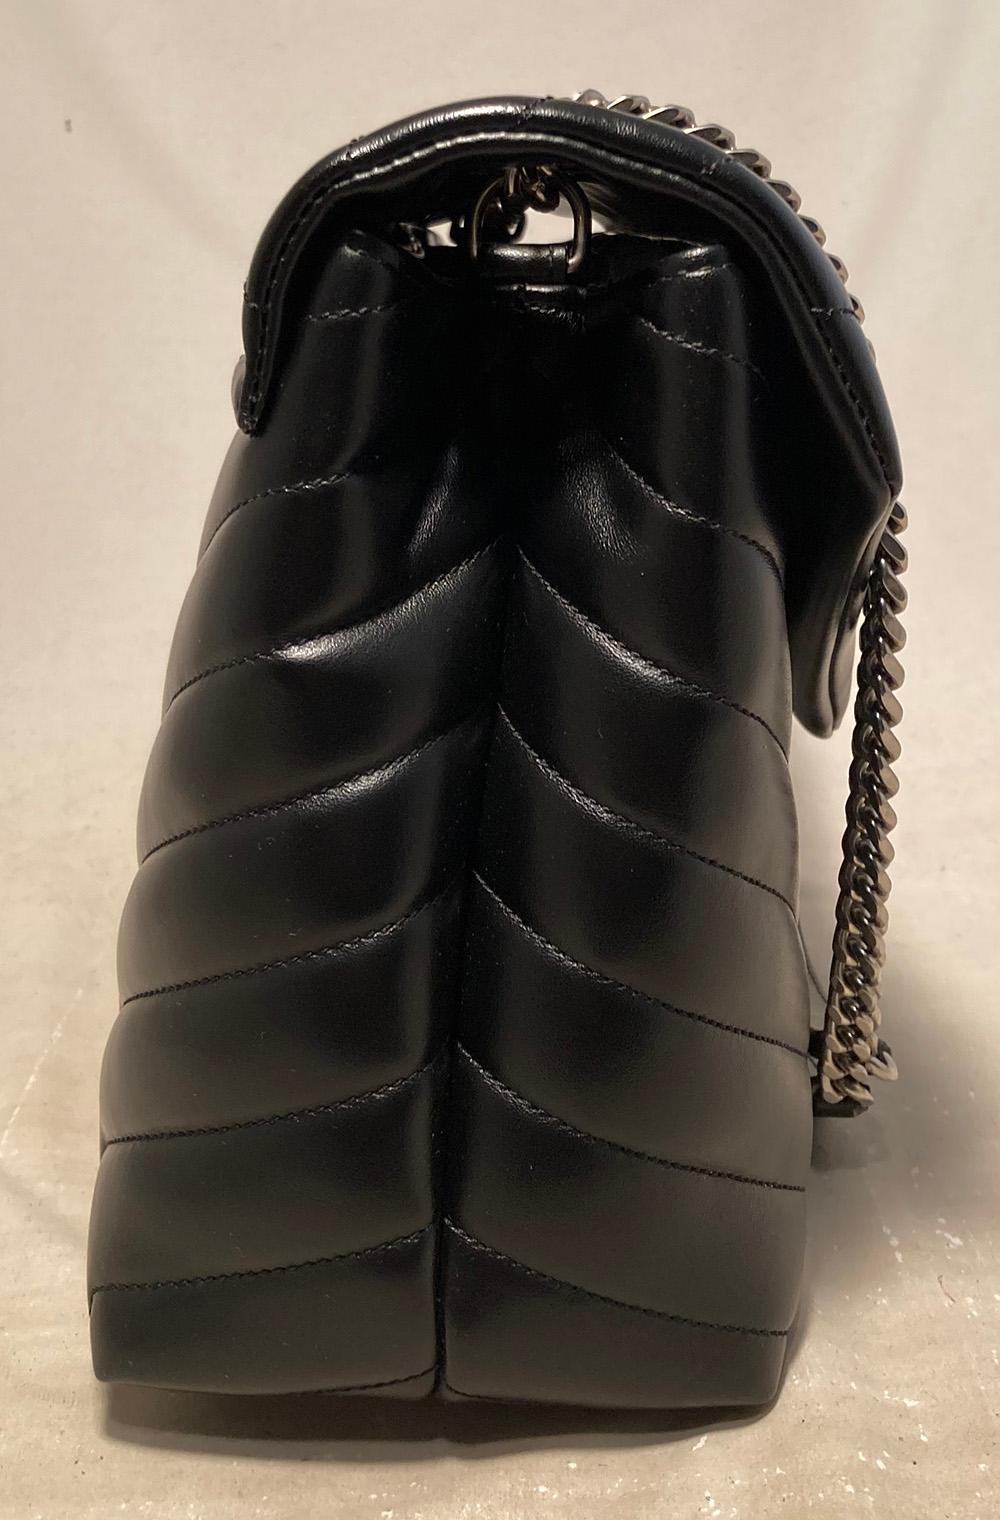 Saint Laurent Loulou Quilted Leather YSL Bag in New without tags condition. Black chevron quilted calfskin leather exterior trimmed with sparkling silver hardware. Front snap flap closure opens to a black satin lined interior with 2 storage